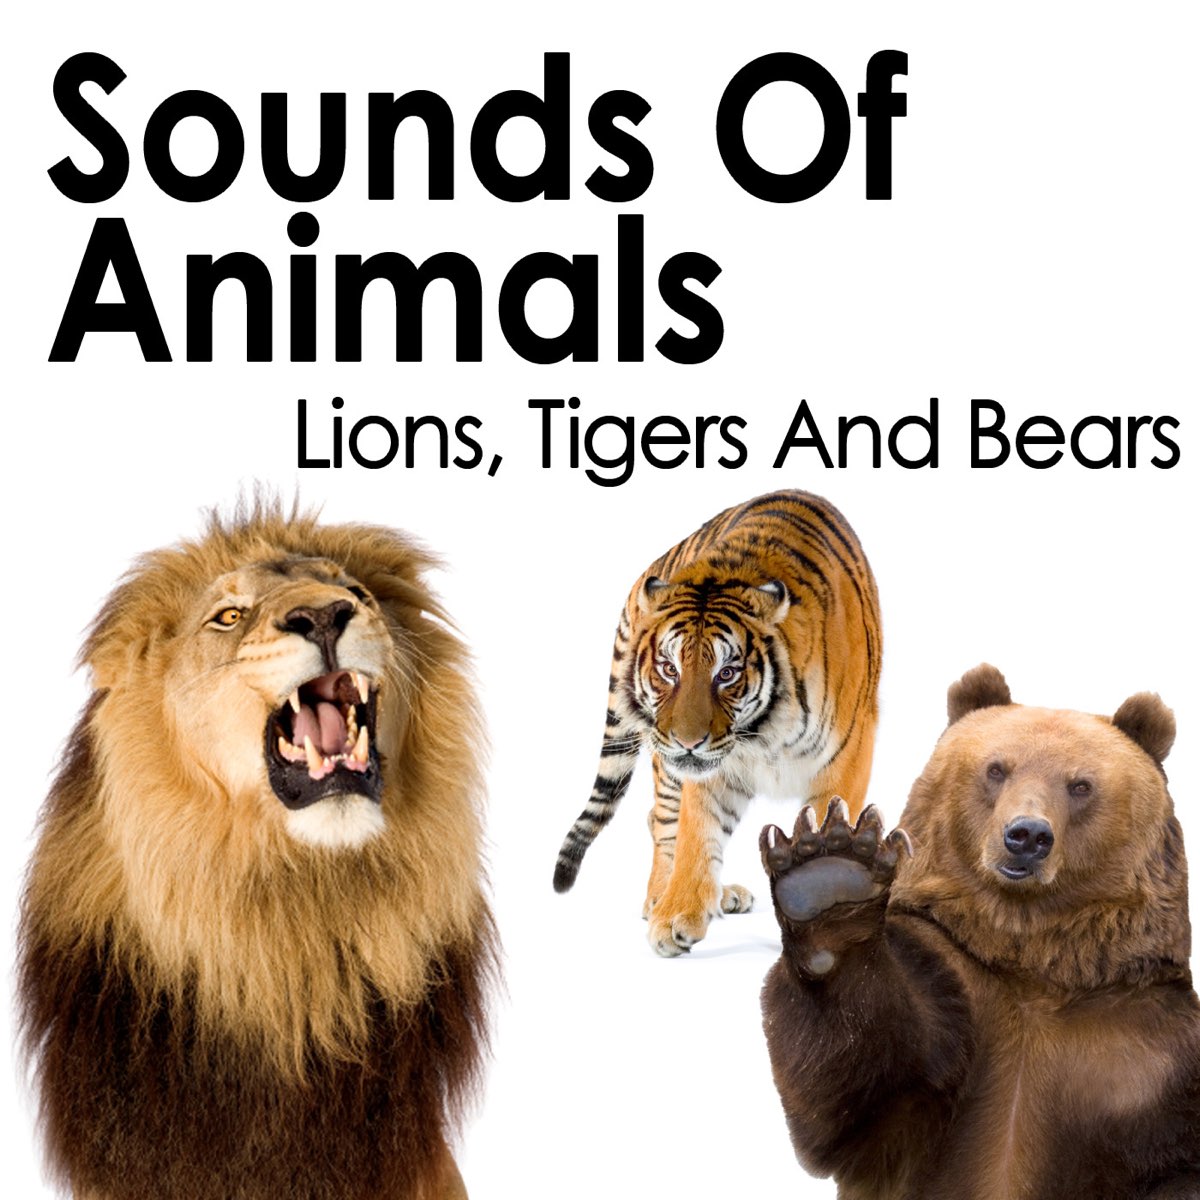 Sounds of Animals: Lions, Tigers and Bears by Pro Sound Effects Library on  Apple Music